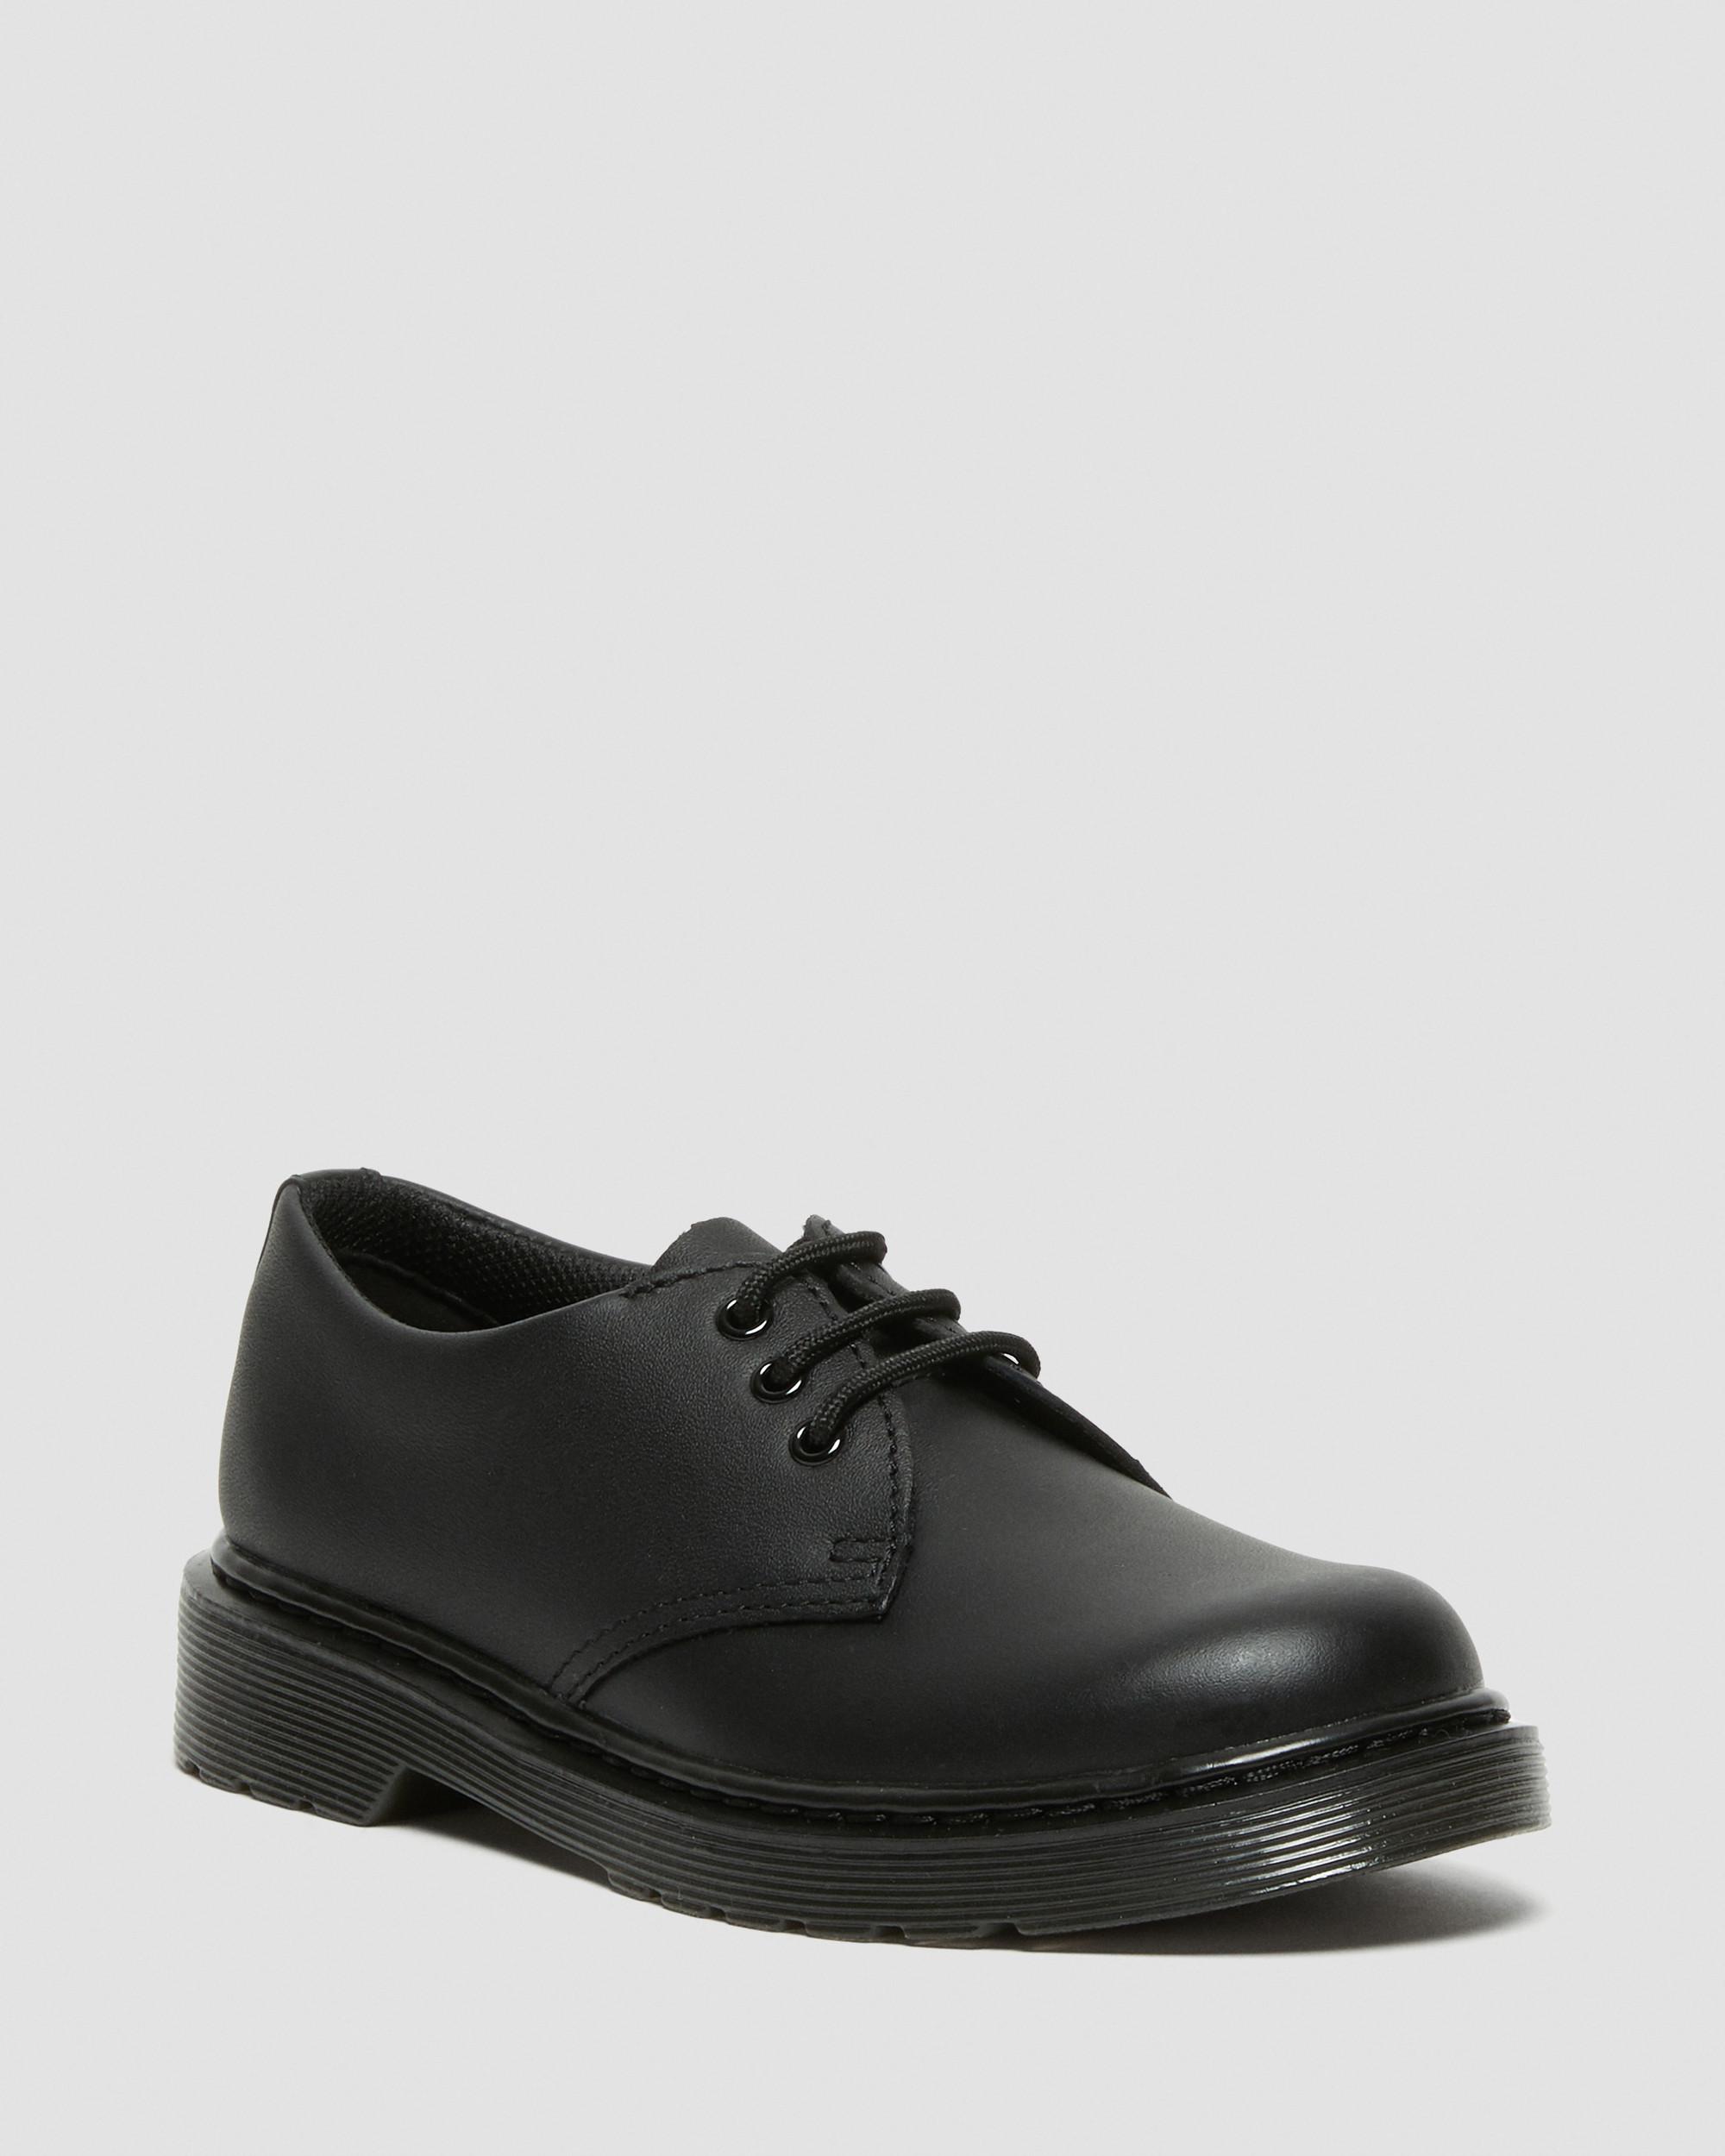 Junior 1461 Mono Softy T Leather Shoes in Black | Dr. Martens